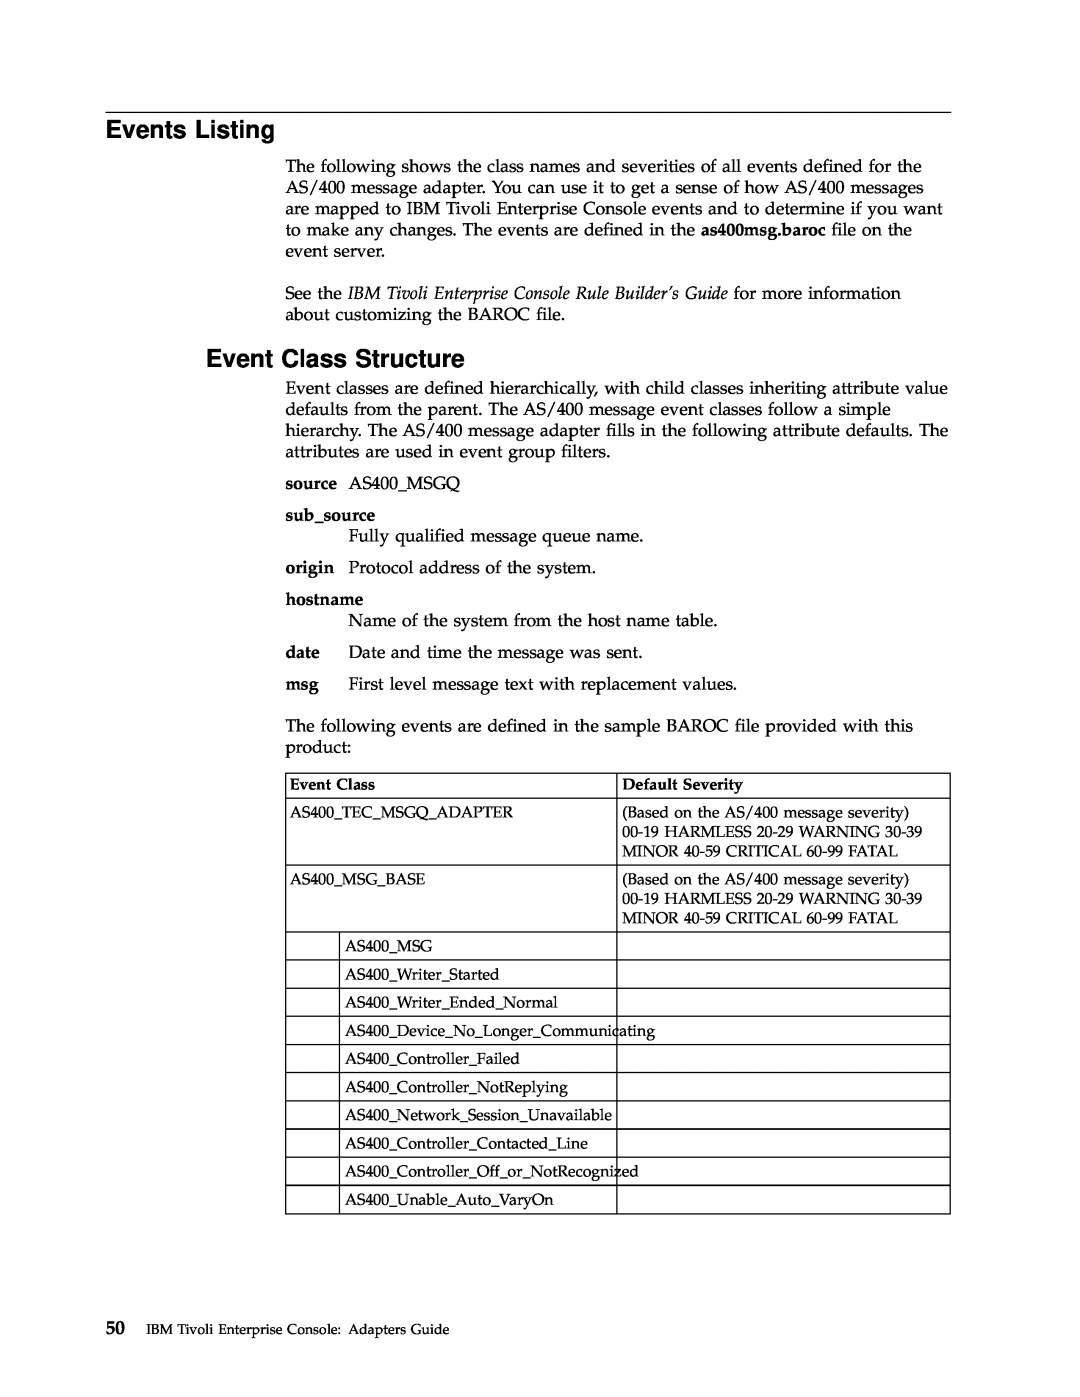 IBM Enterprise Console manual Events Listing, Event Class Structure, subsource, hostname 